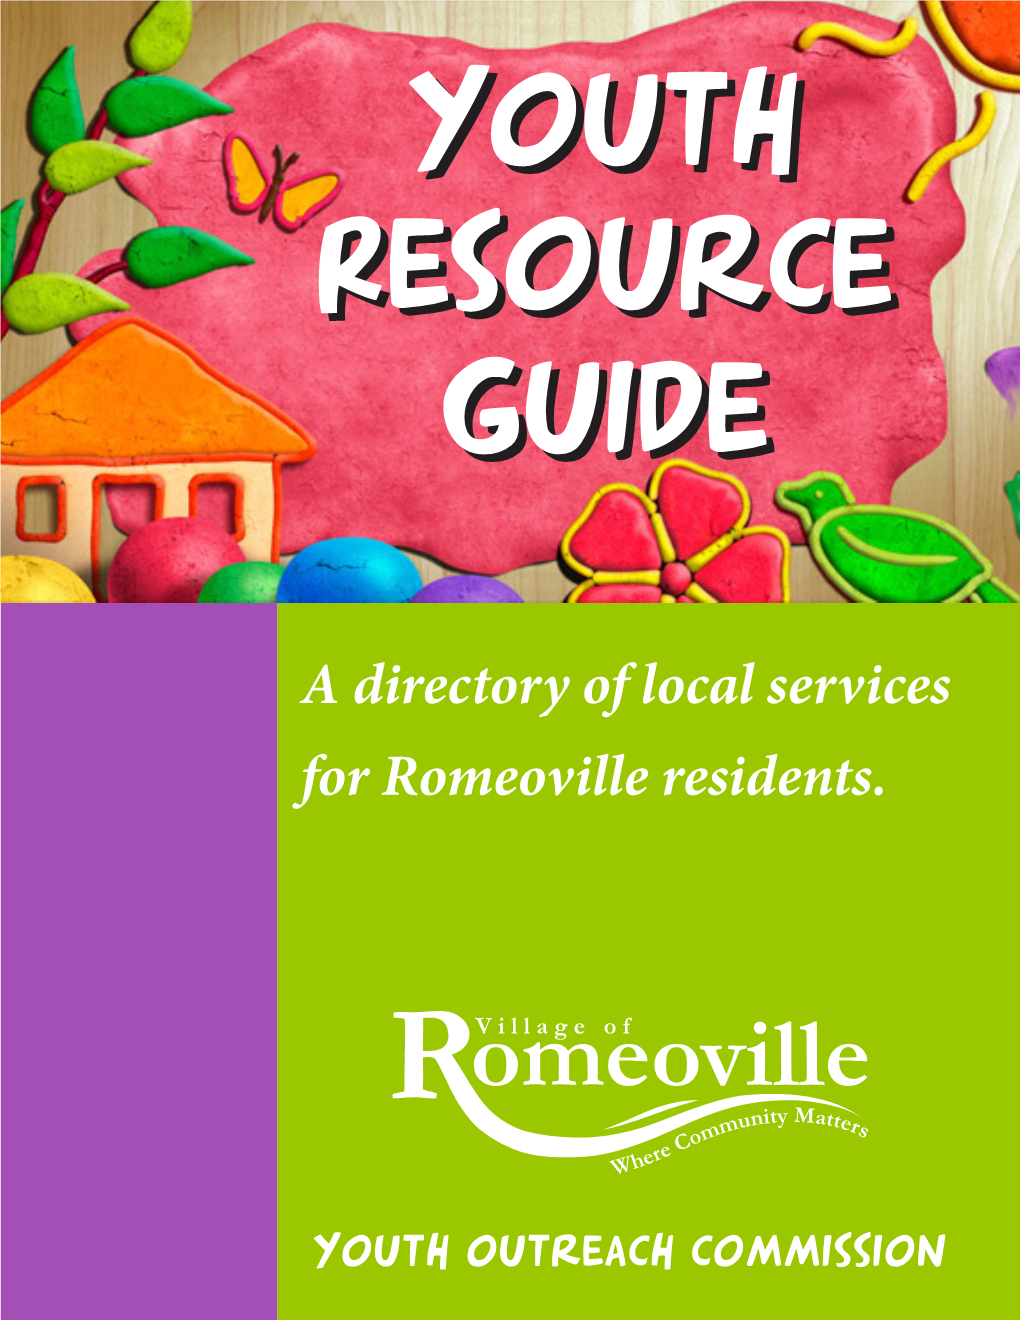 A Directory of Local Services for Romeoville Residents